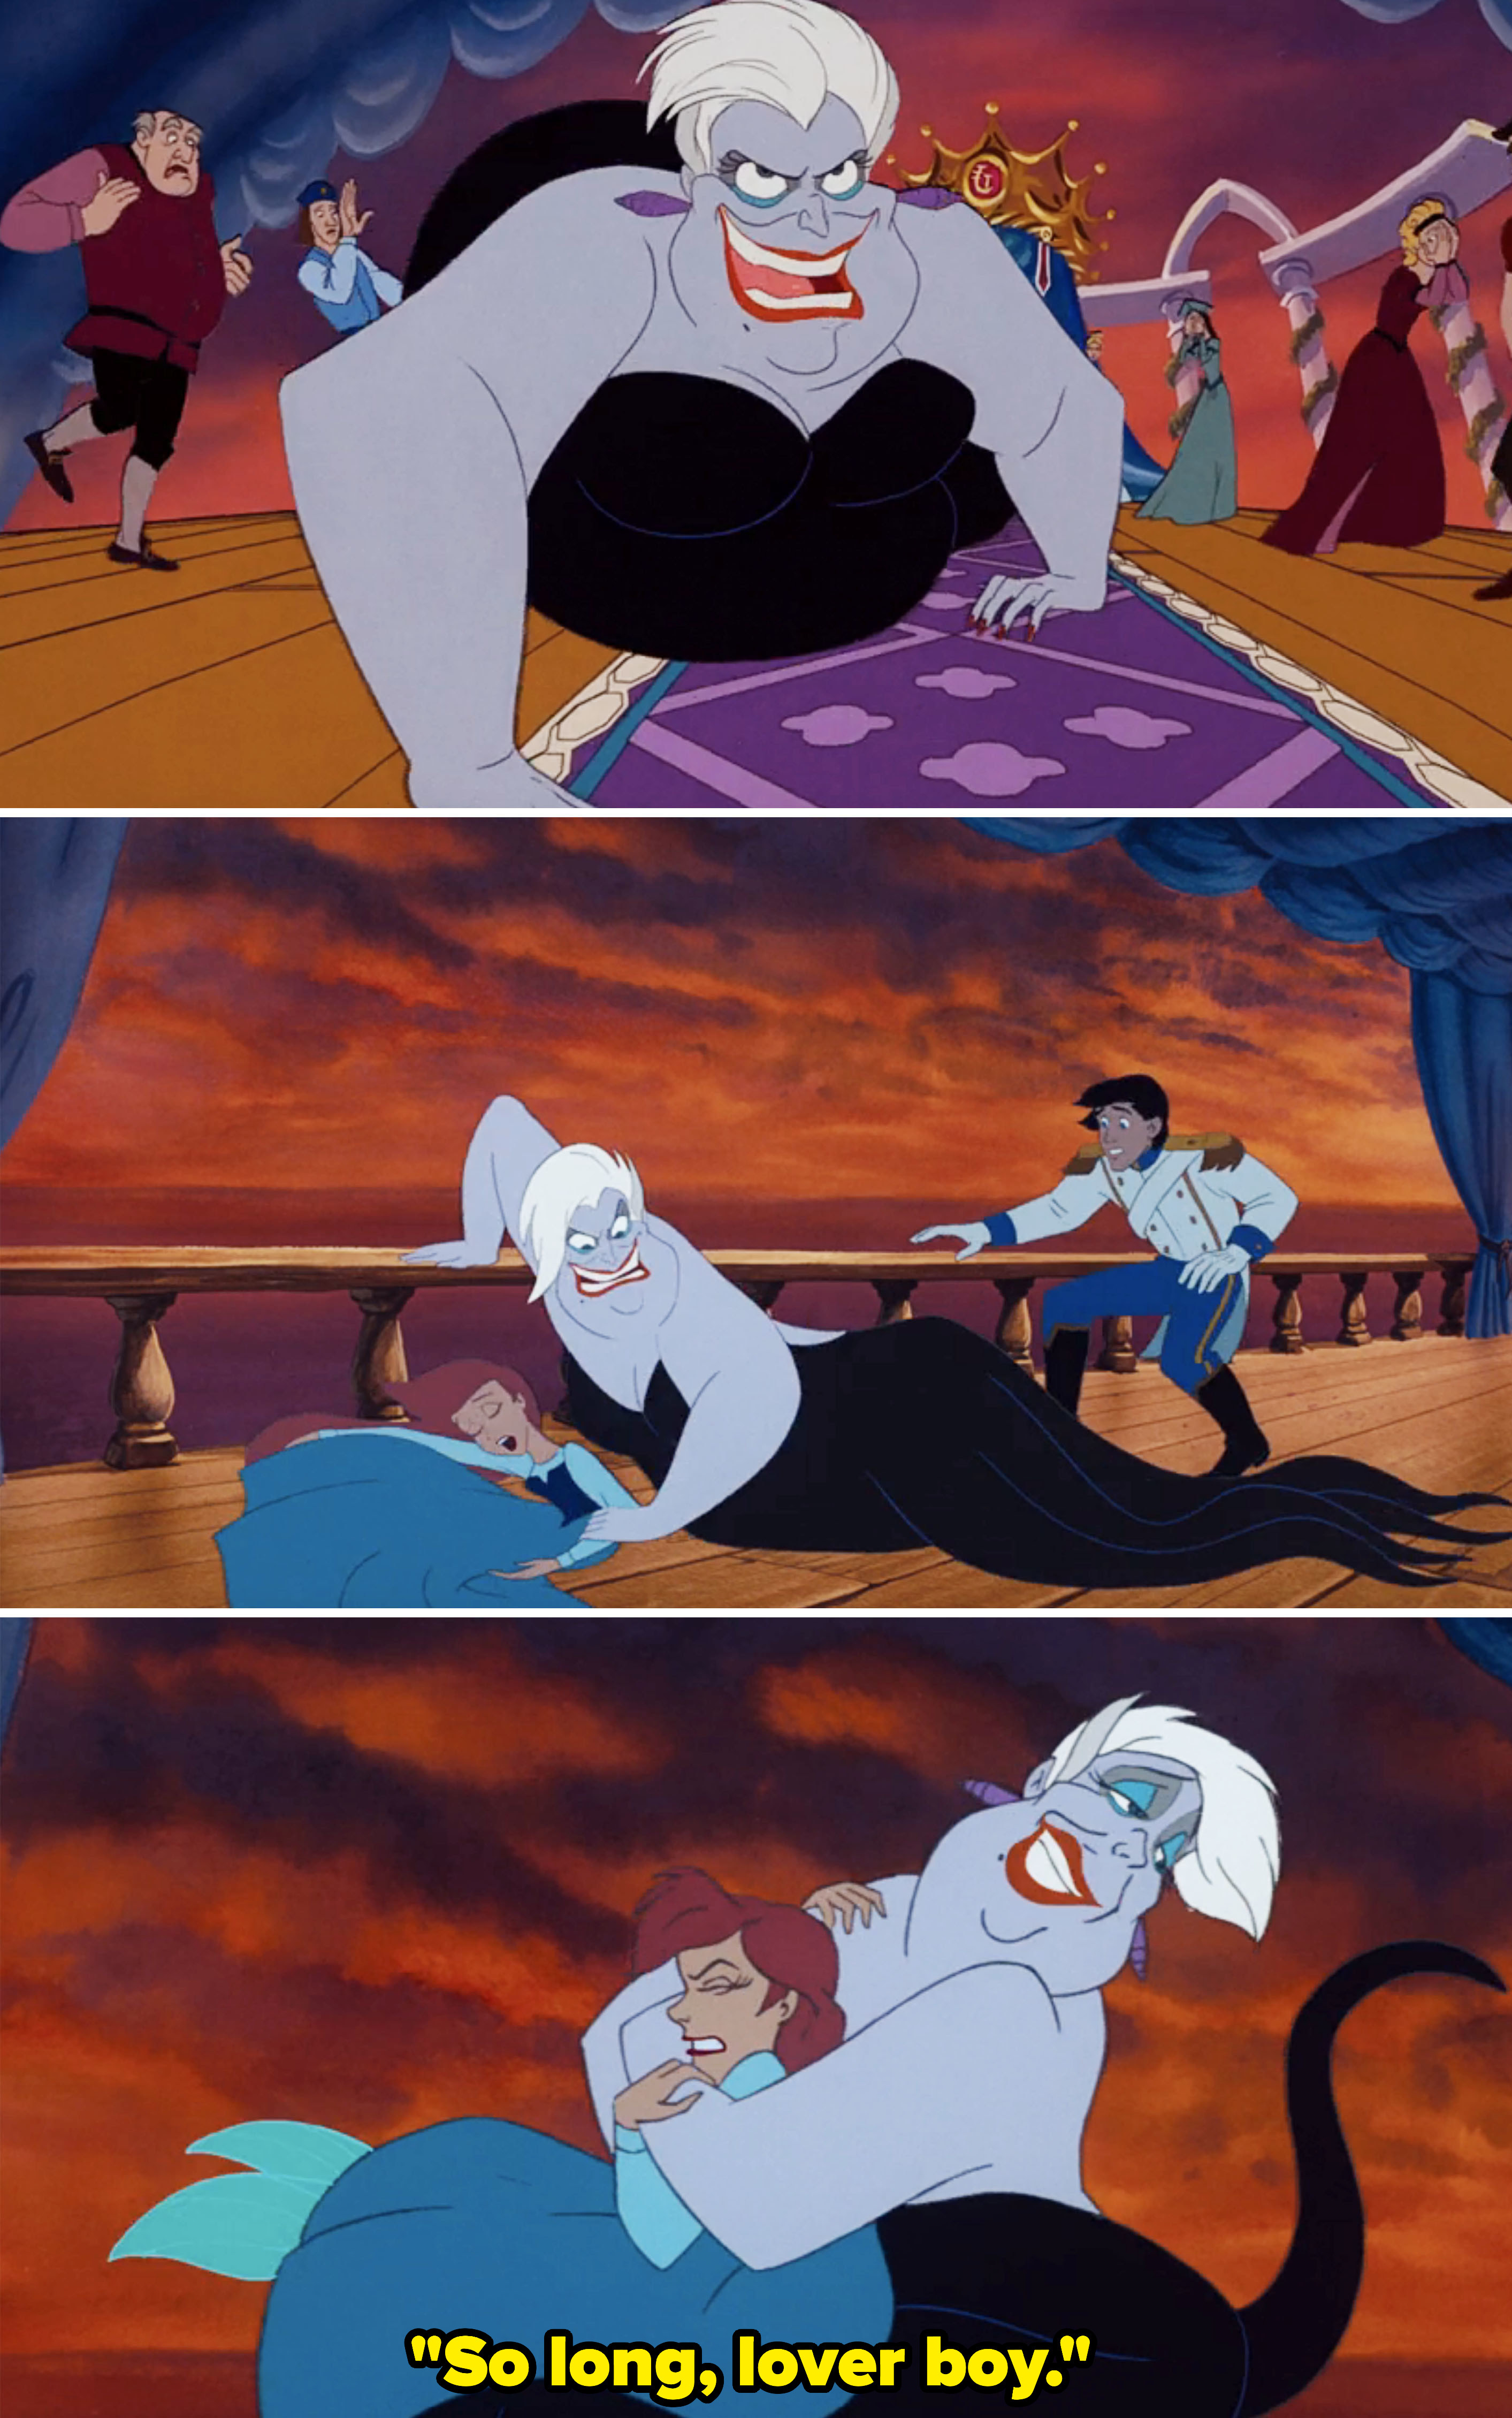 Screenshots from &quot;The Little Mermaid&quot;